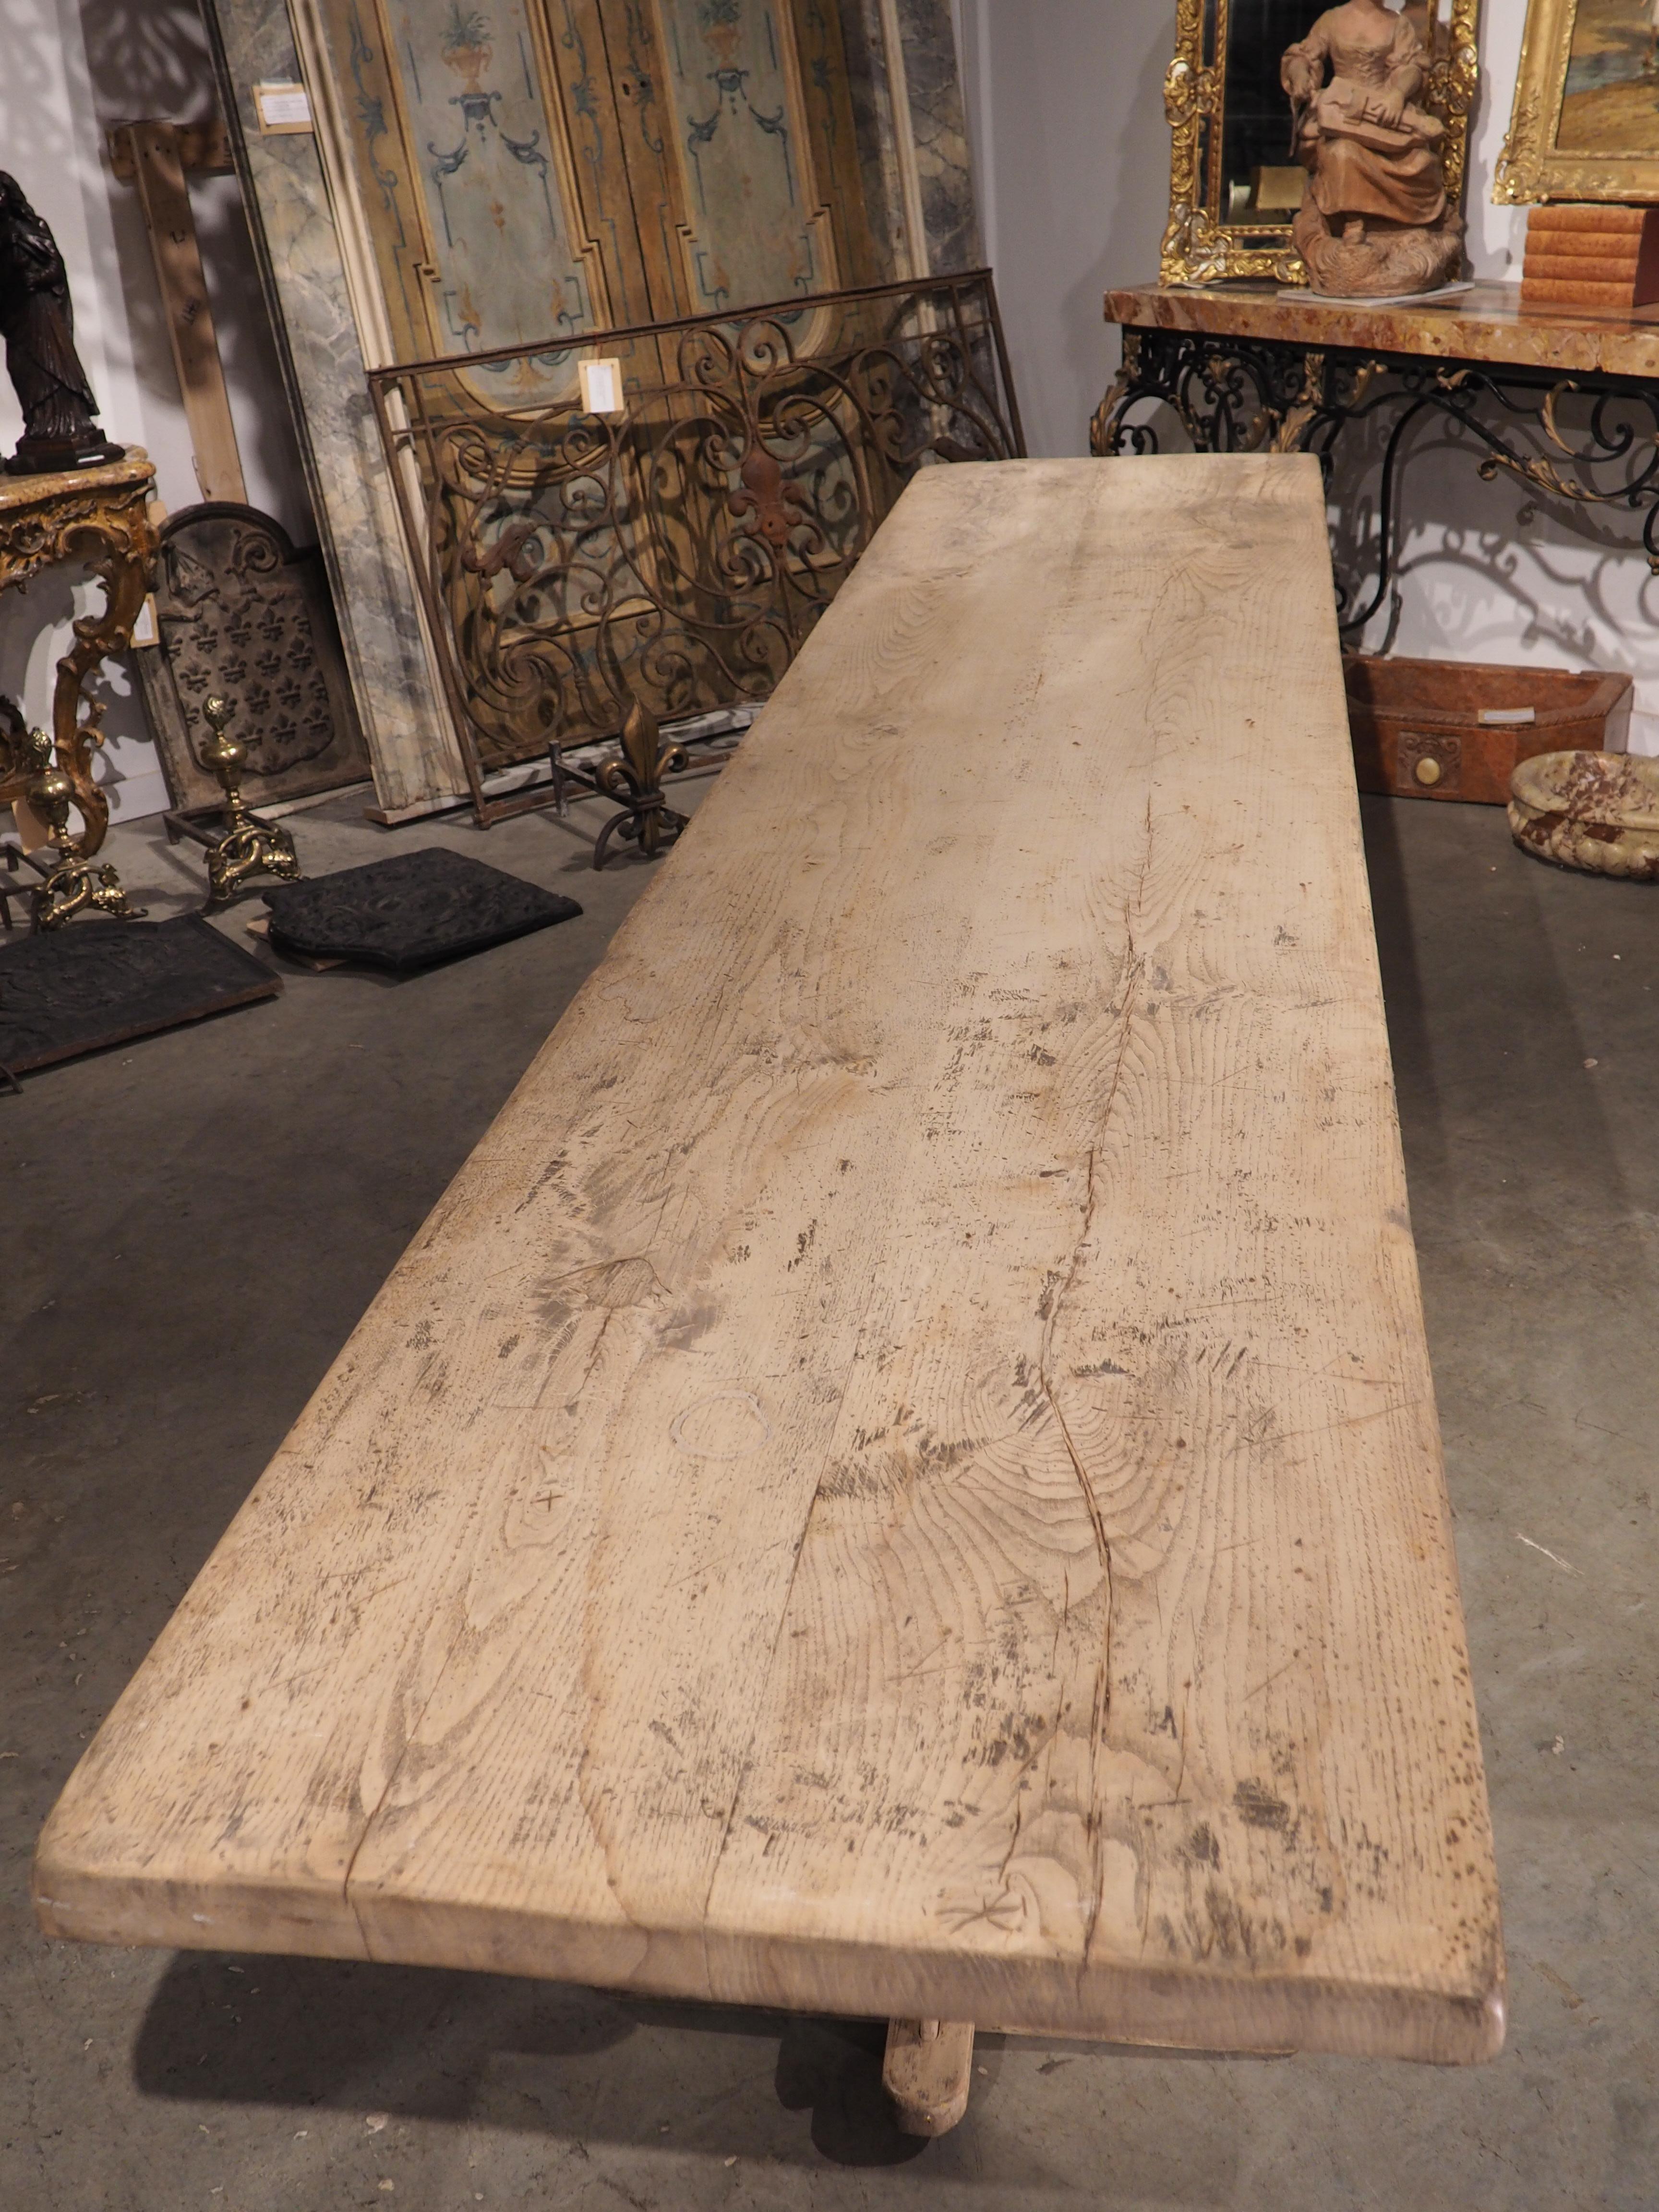 At over 11 feet long (137 ¾ inches), this antique dining table from Italy can seat 10-12 adults comfortably. The table was hand carved from oak wood in the 1800s in Asti, in the Piedmont region of northwestern Italy. It has been stripped of the